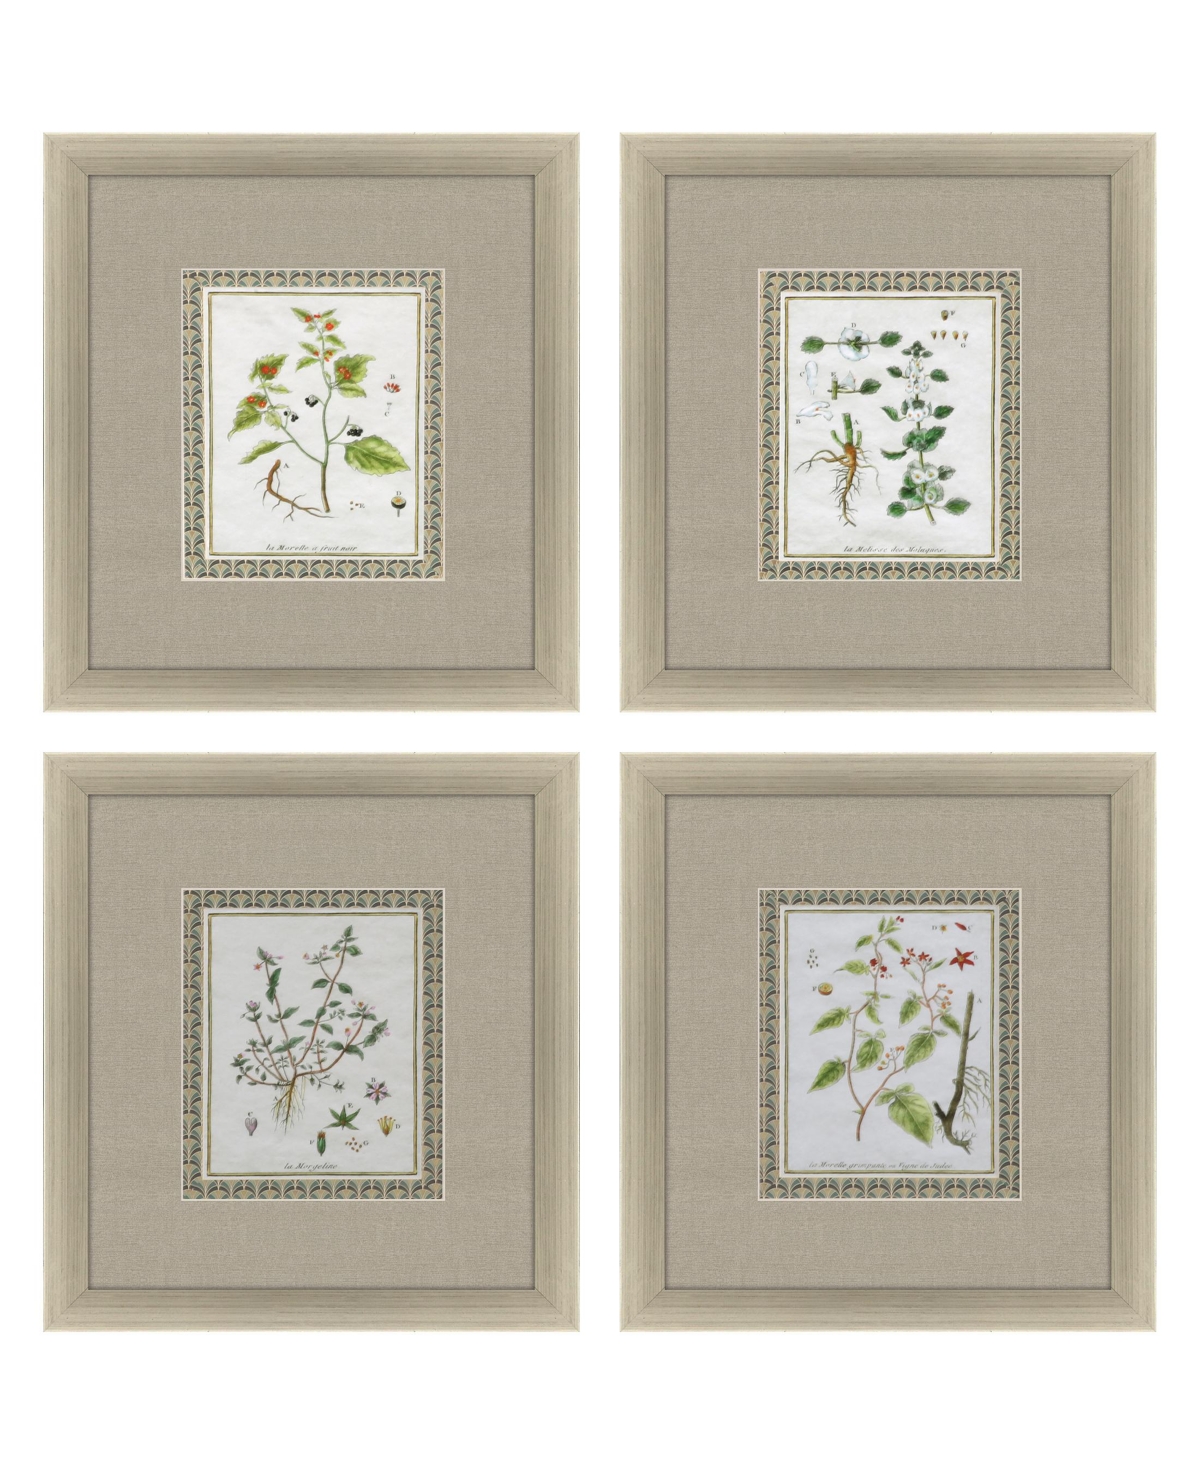 Paragon Picture Gallery La Passerage Ii Framed Art, Set Of 4 In Green